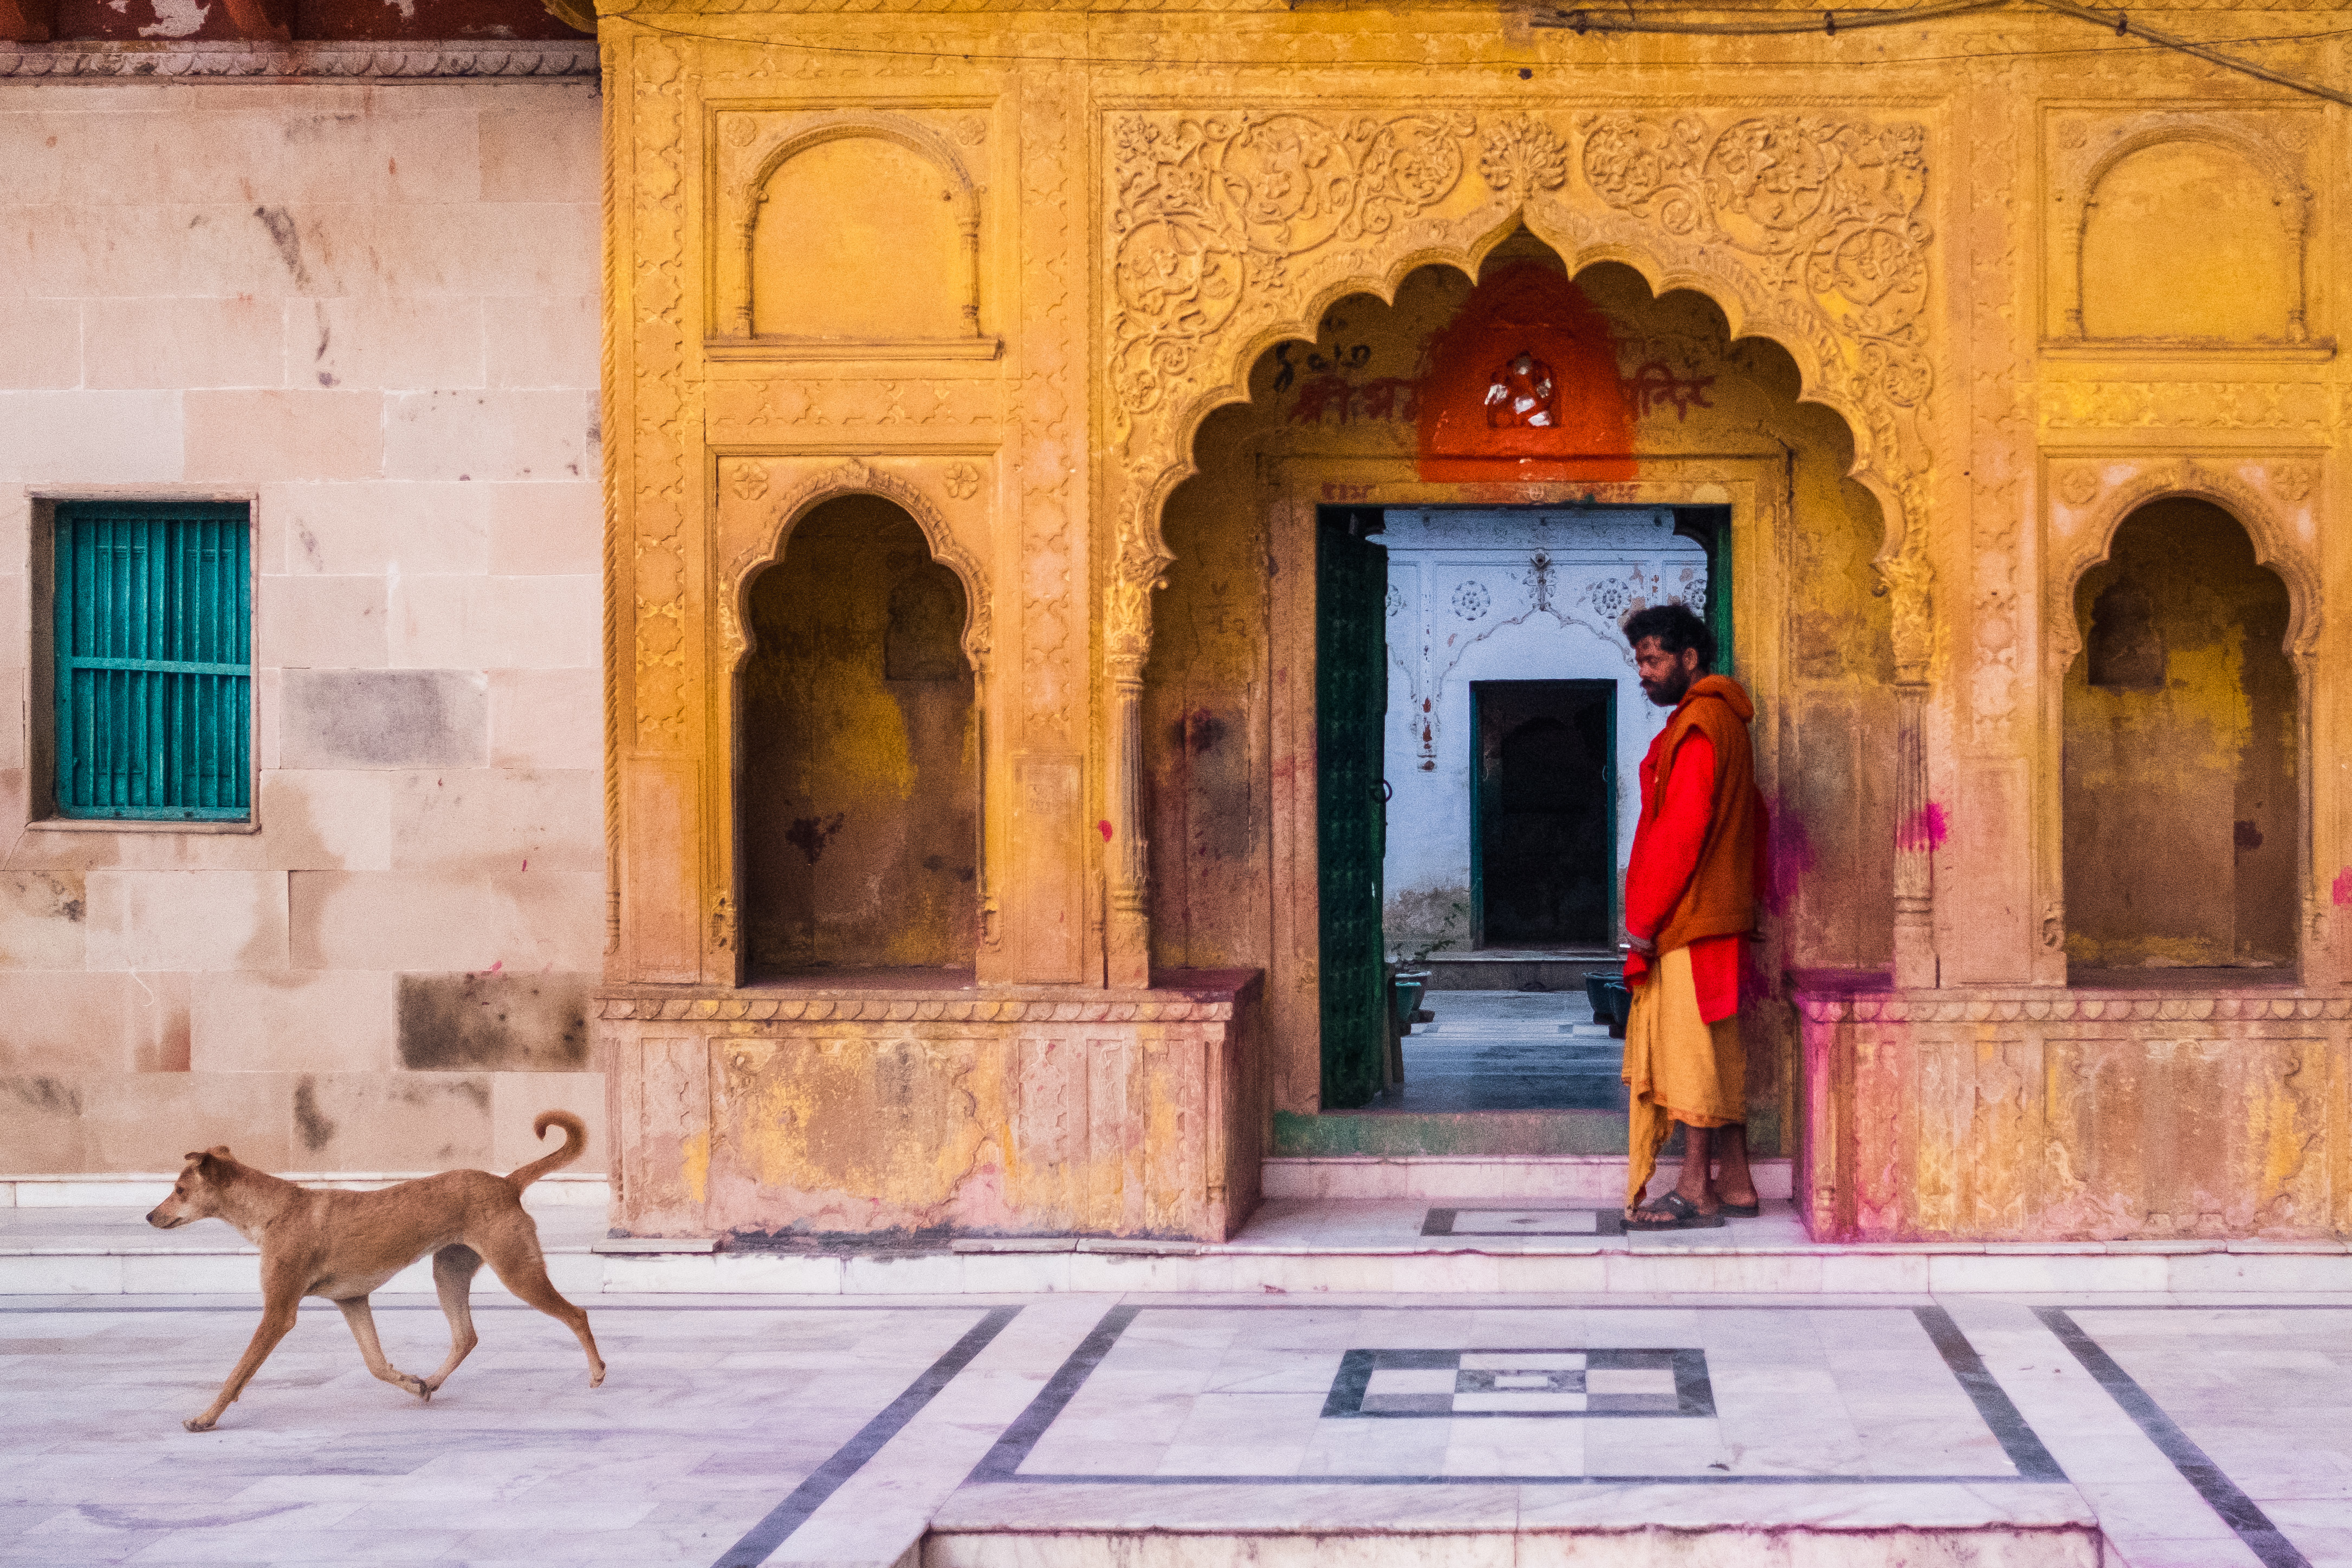 India Street Photography During Holi Festival. Man watches as a dog passes his doorway. Images by Jason Vinson